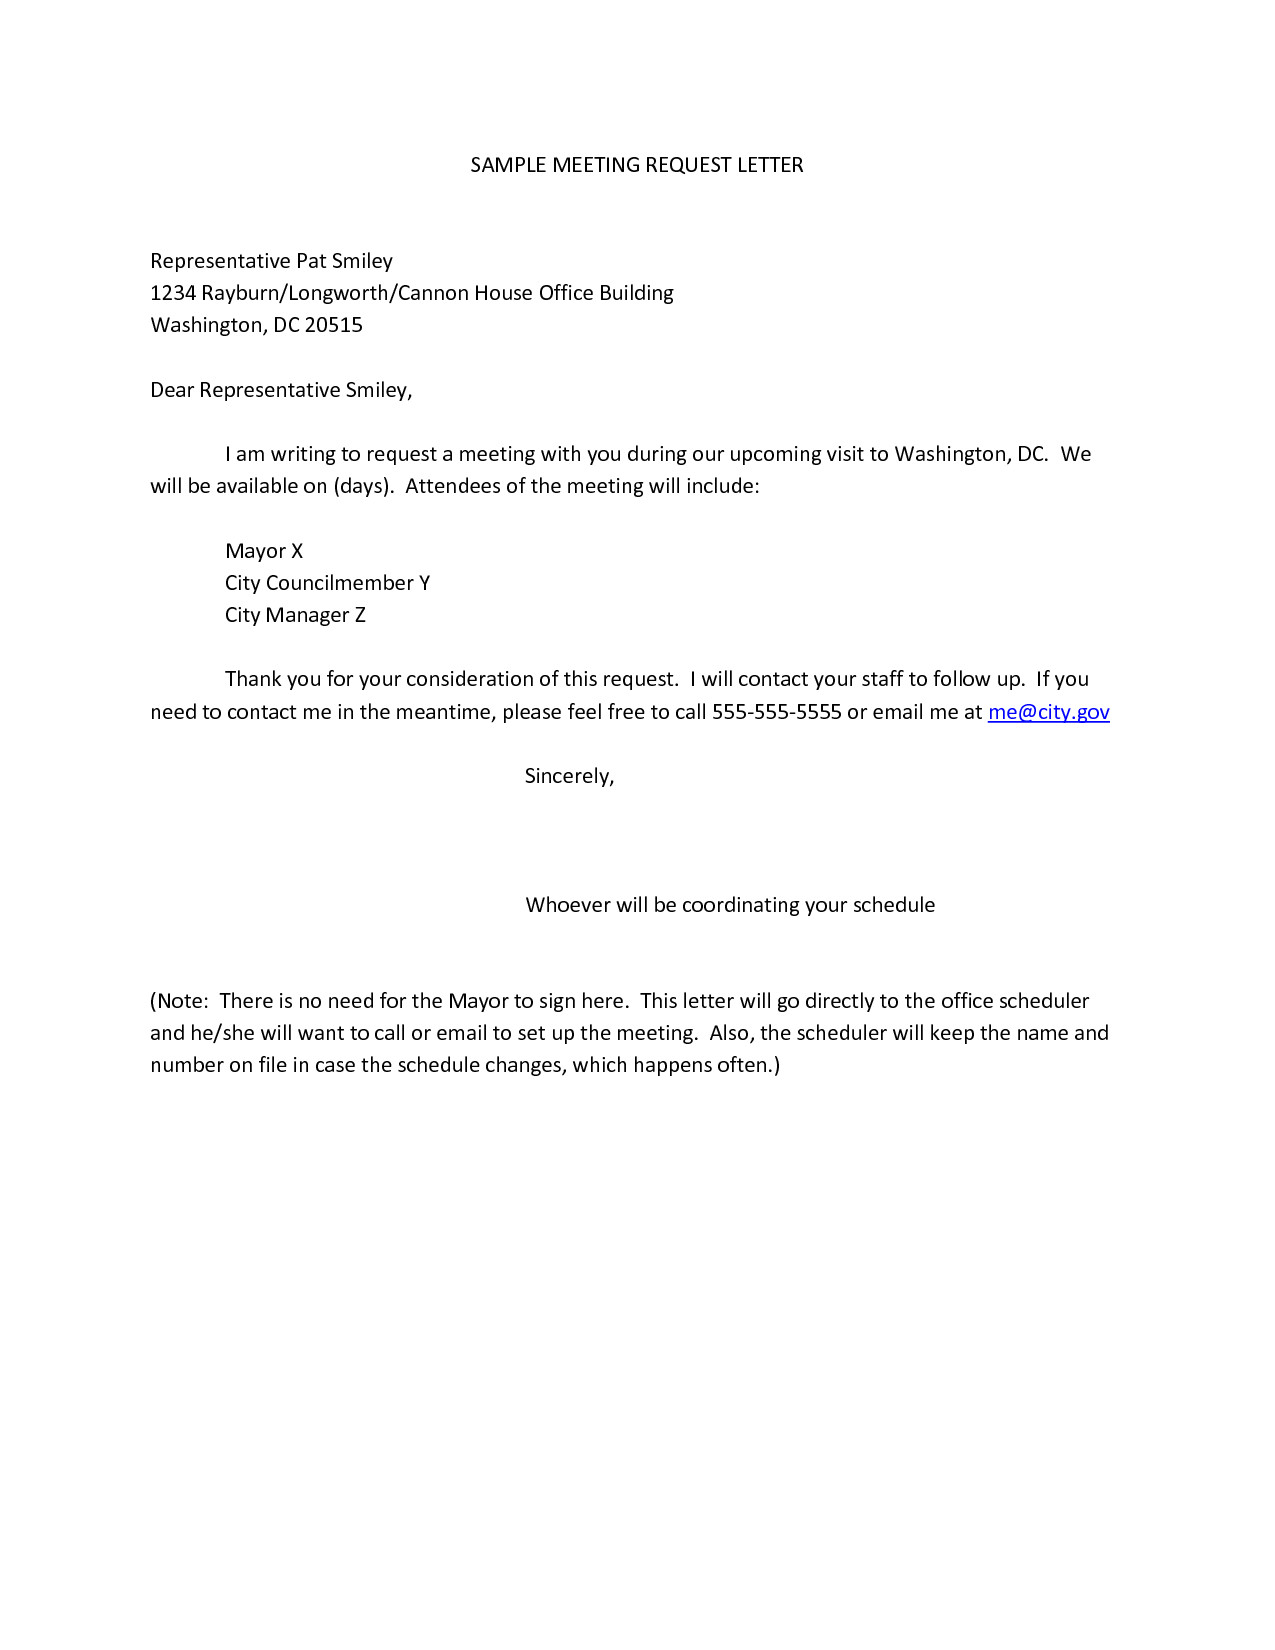 sample letter to request a meeting with a manager